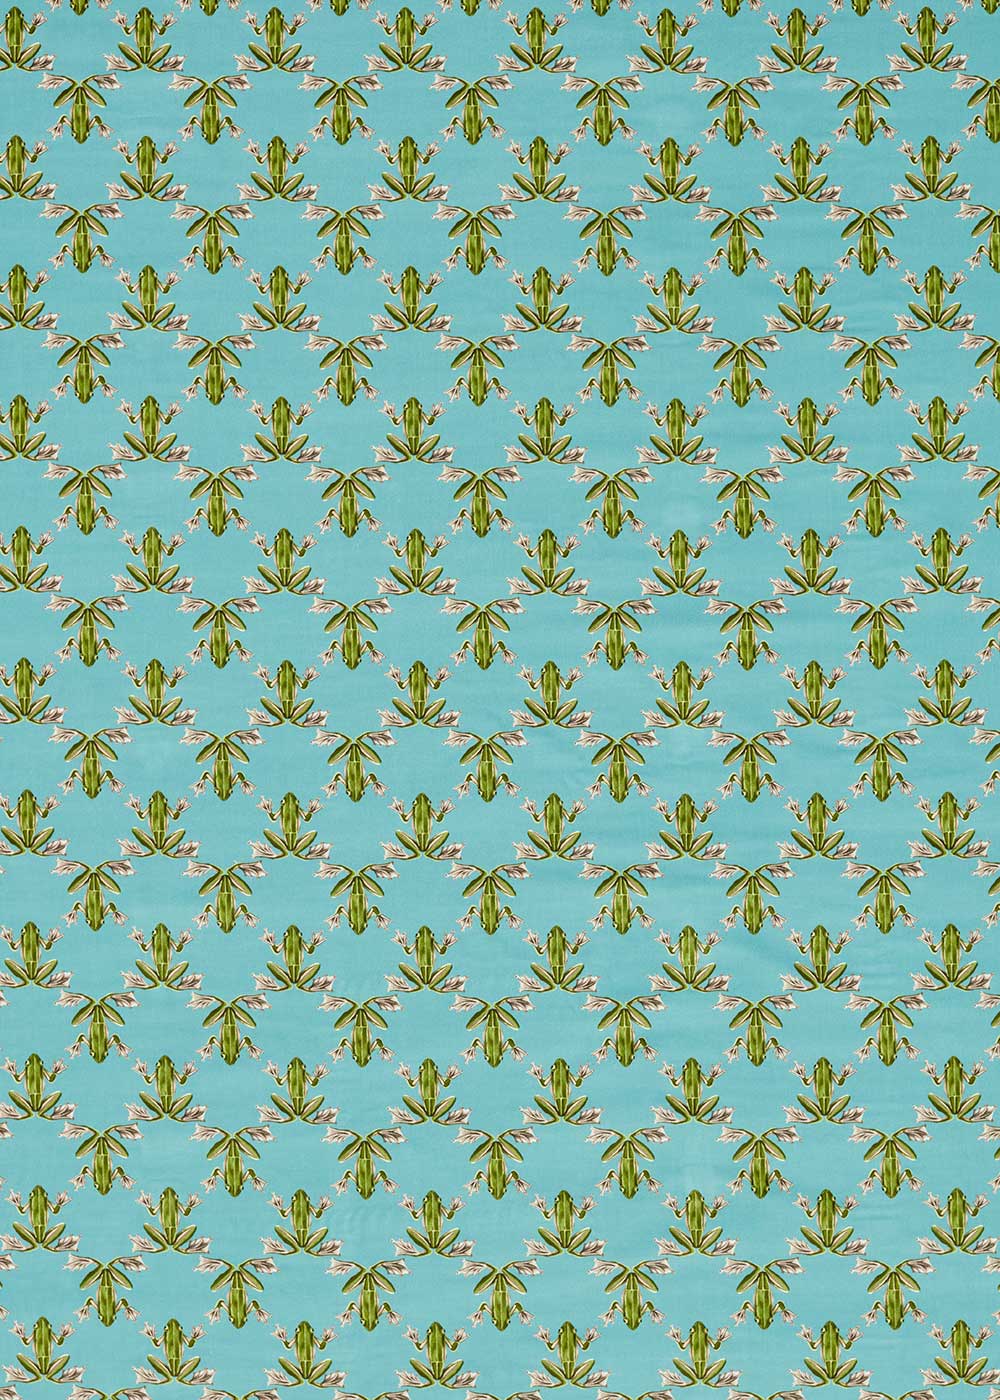 Wood Frog Fabric - Azul - by Harlequin